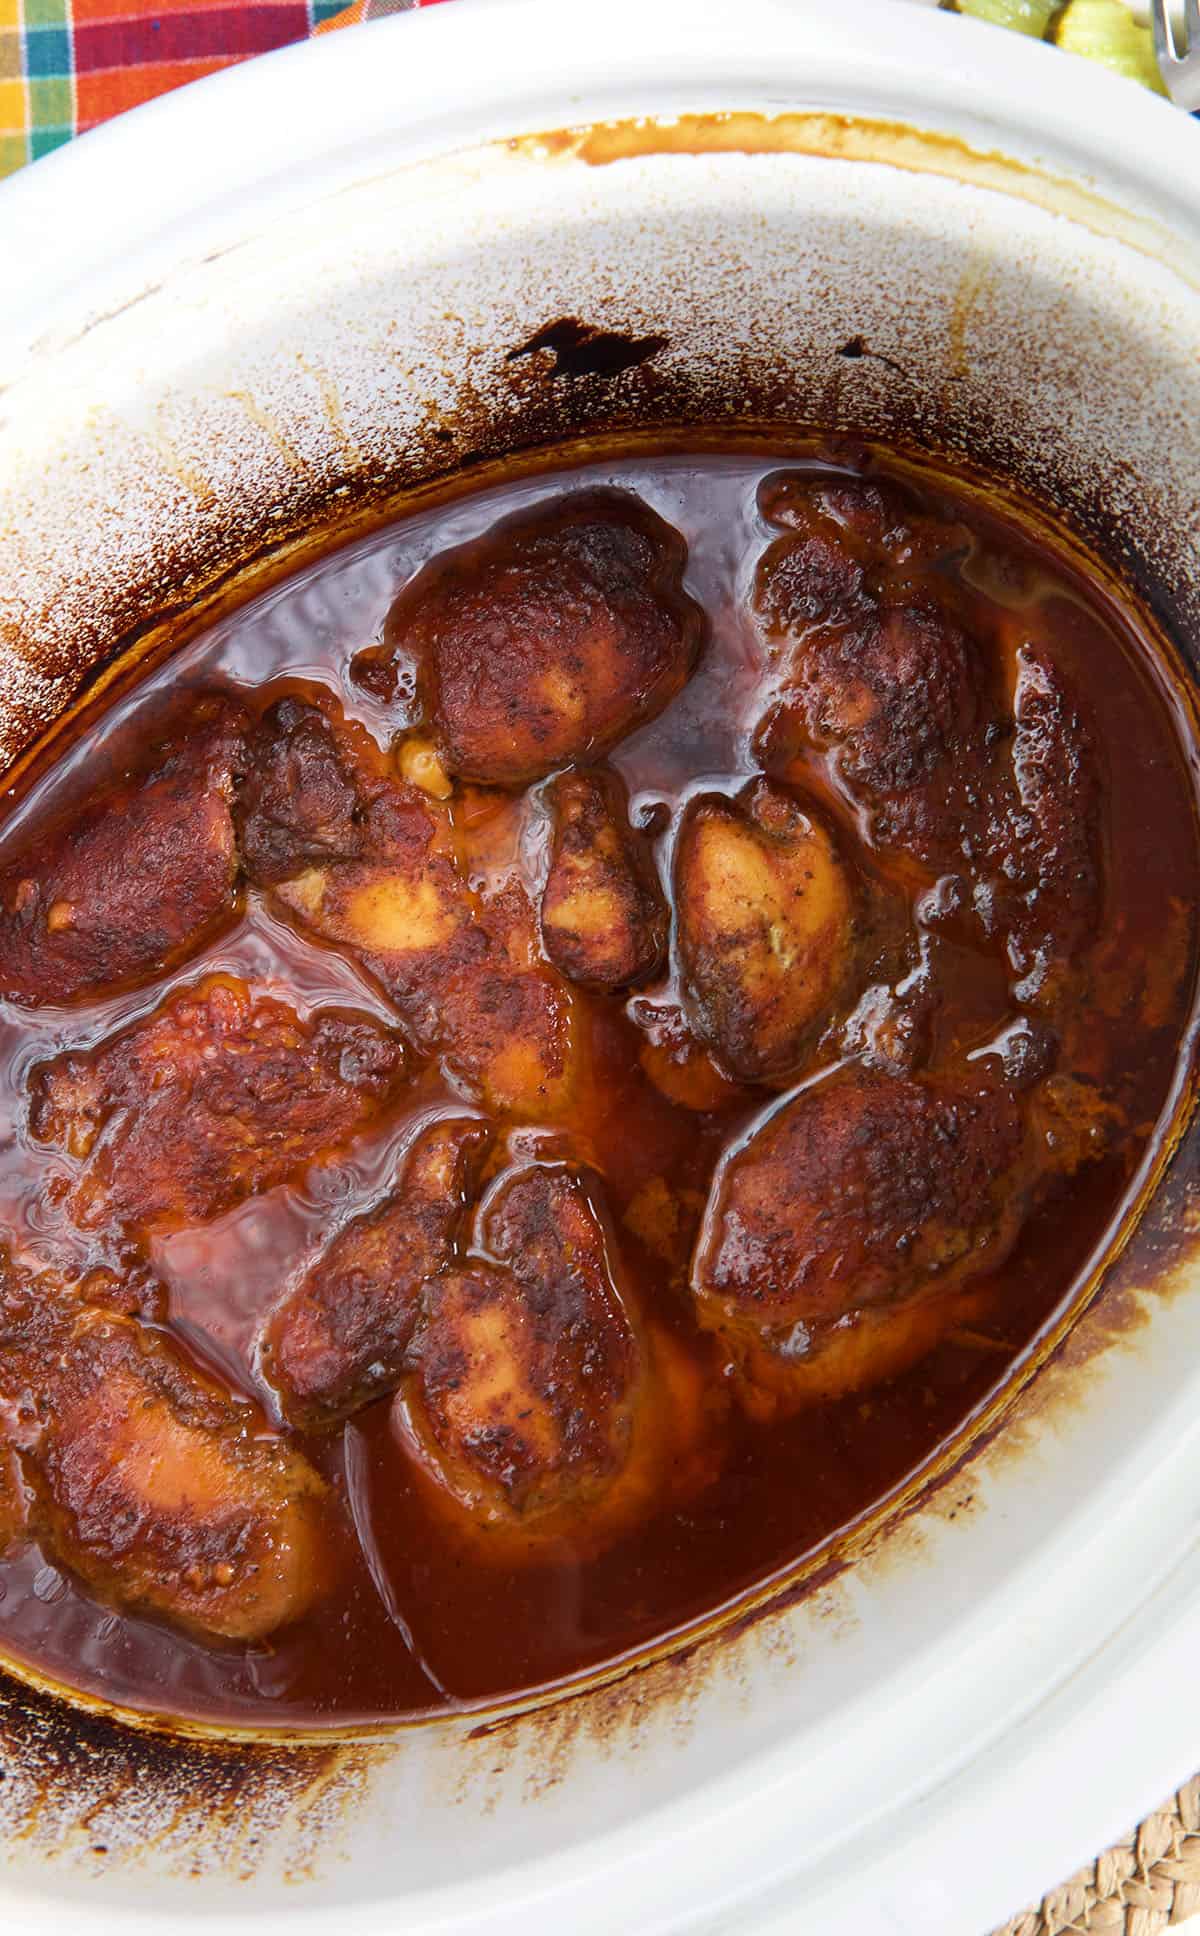 Chicken has been cooked in a Crockpot with chicken stock and bbq sauce.